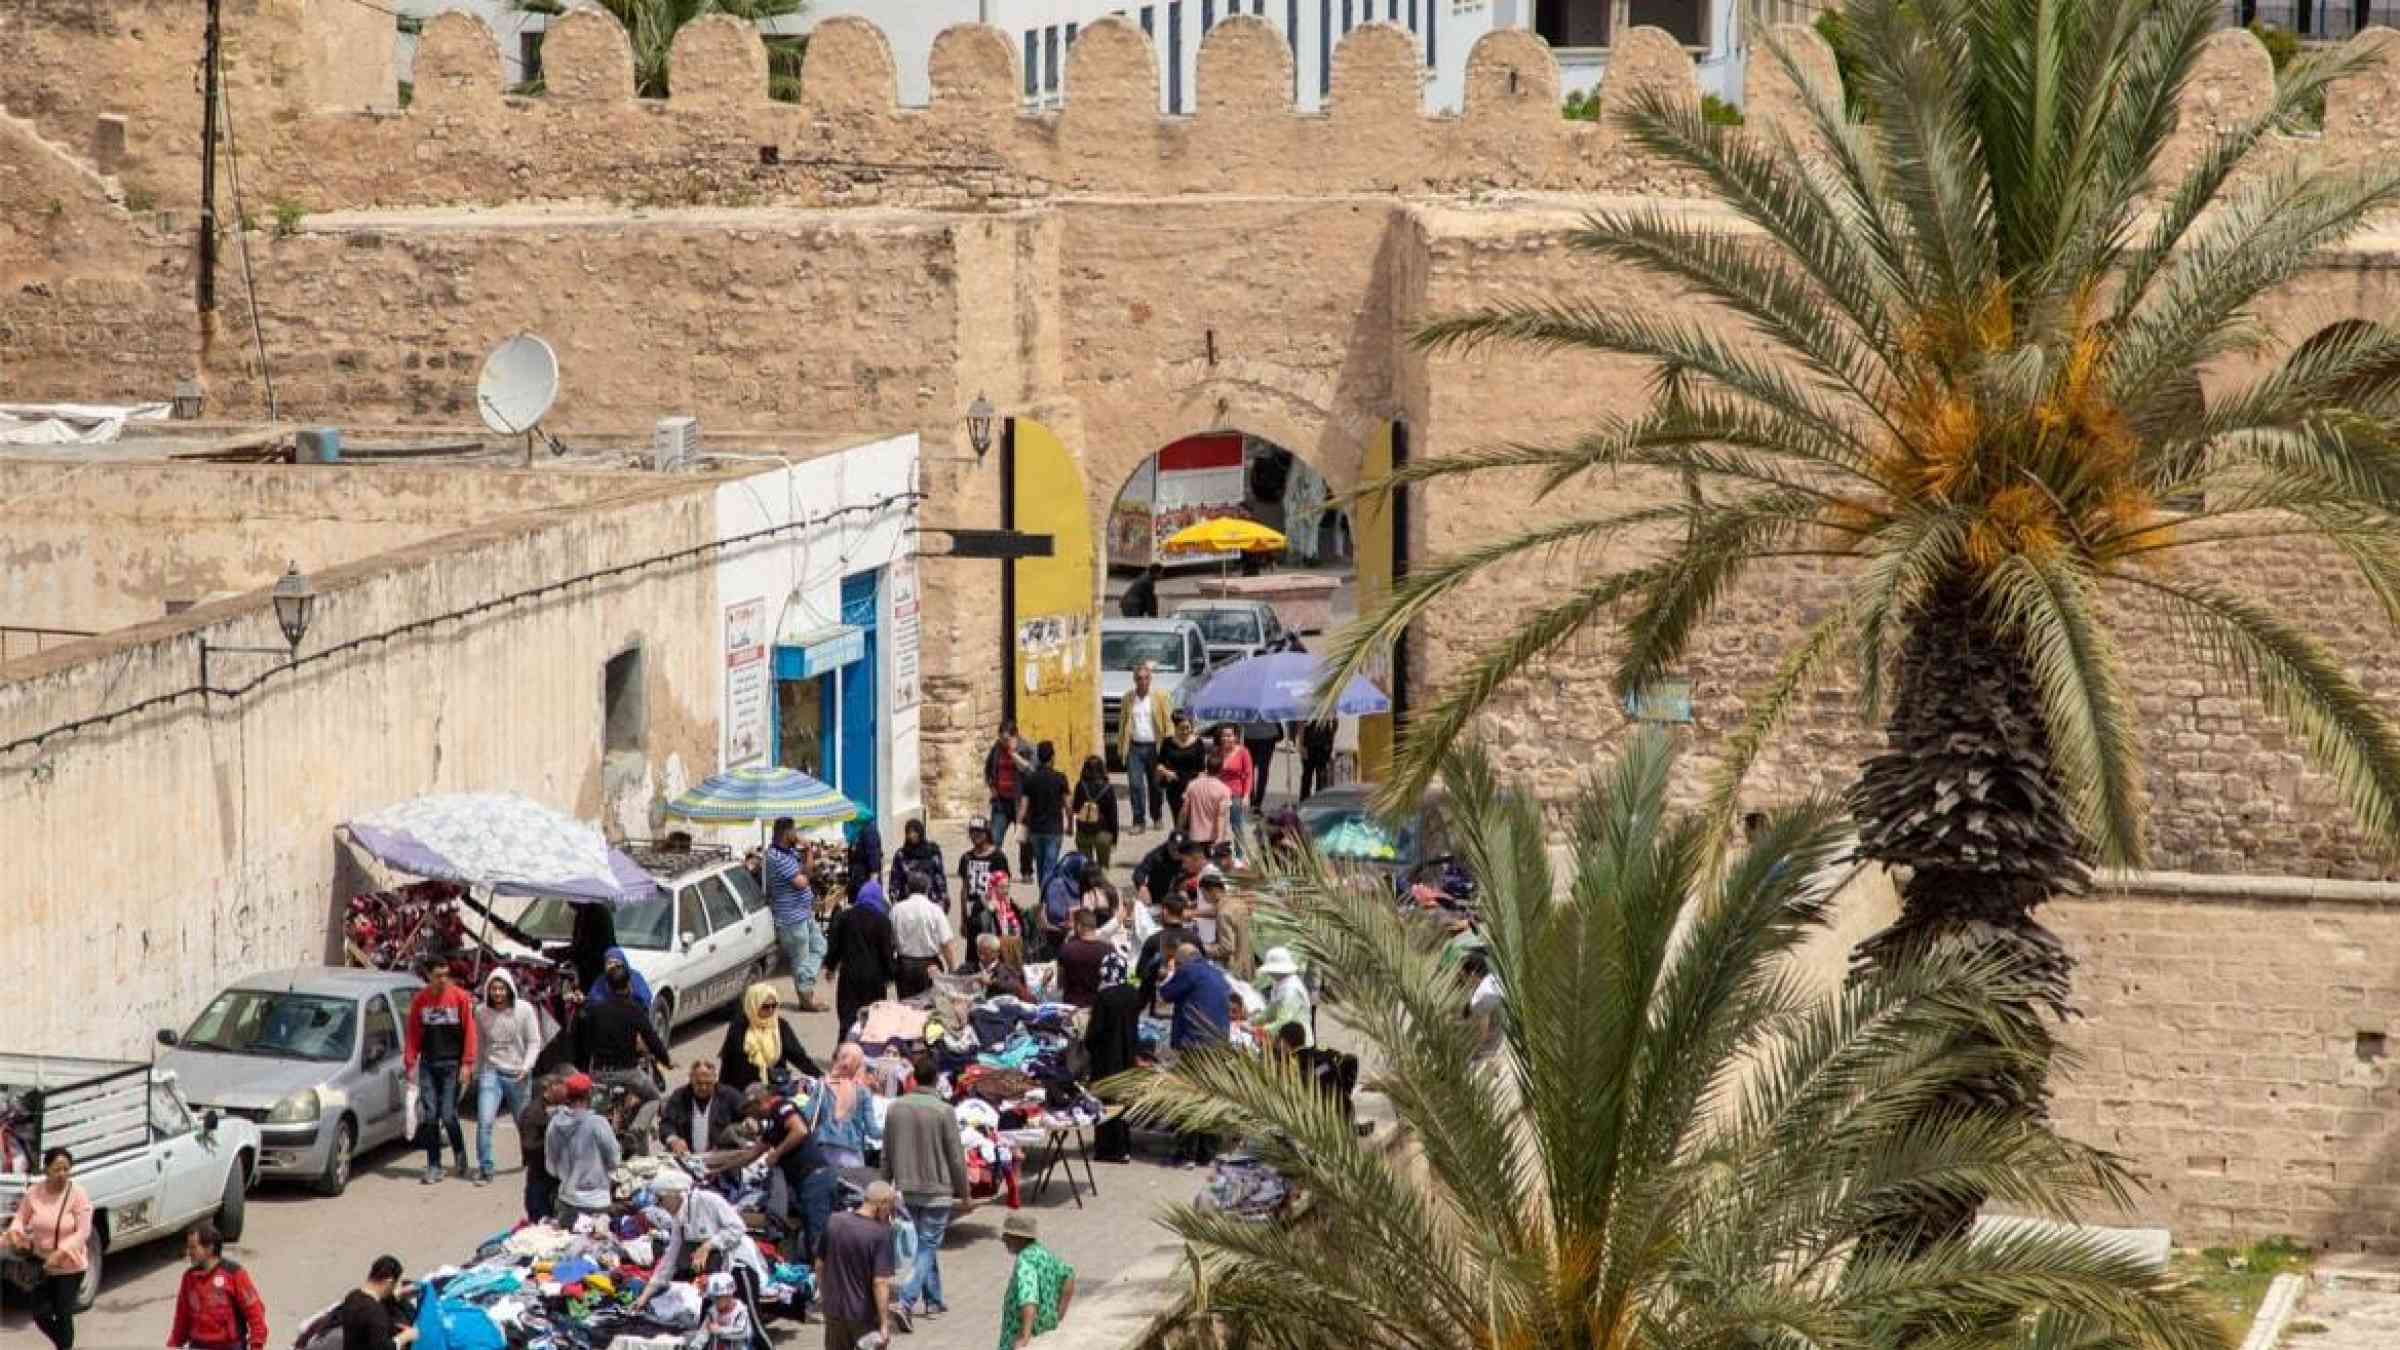 Aerial view of a crowded market in Sousse, Tunisia